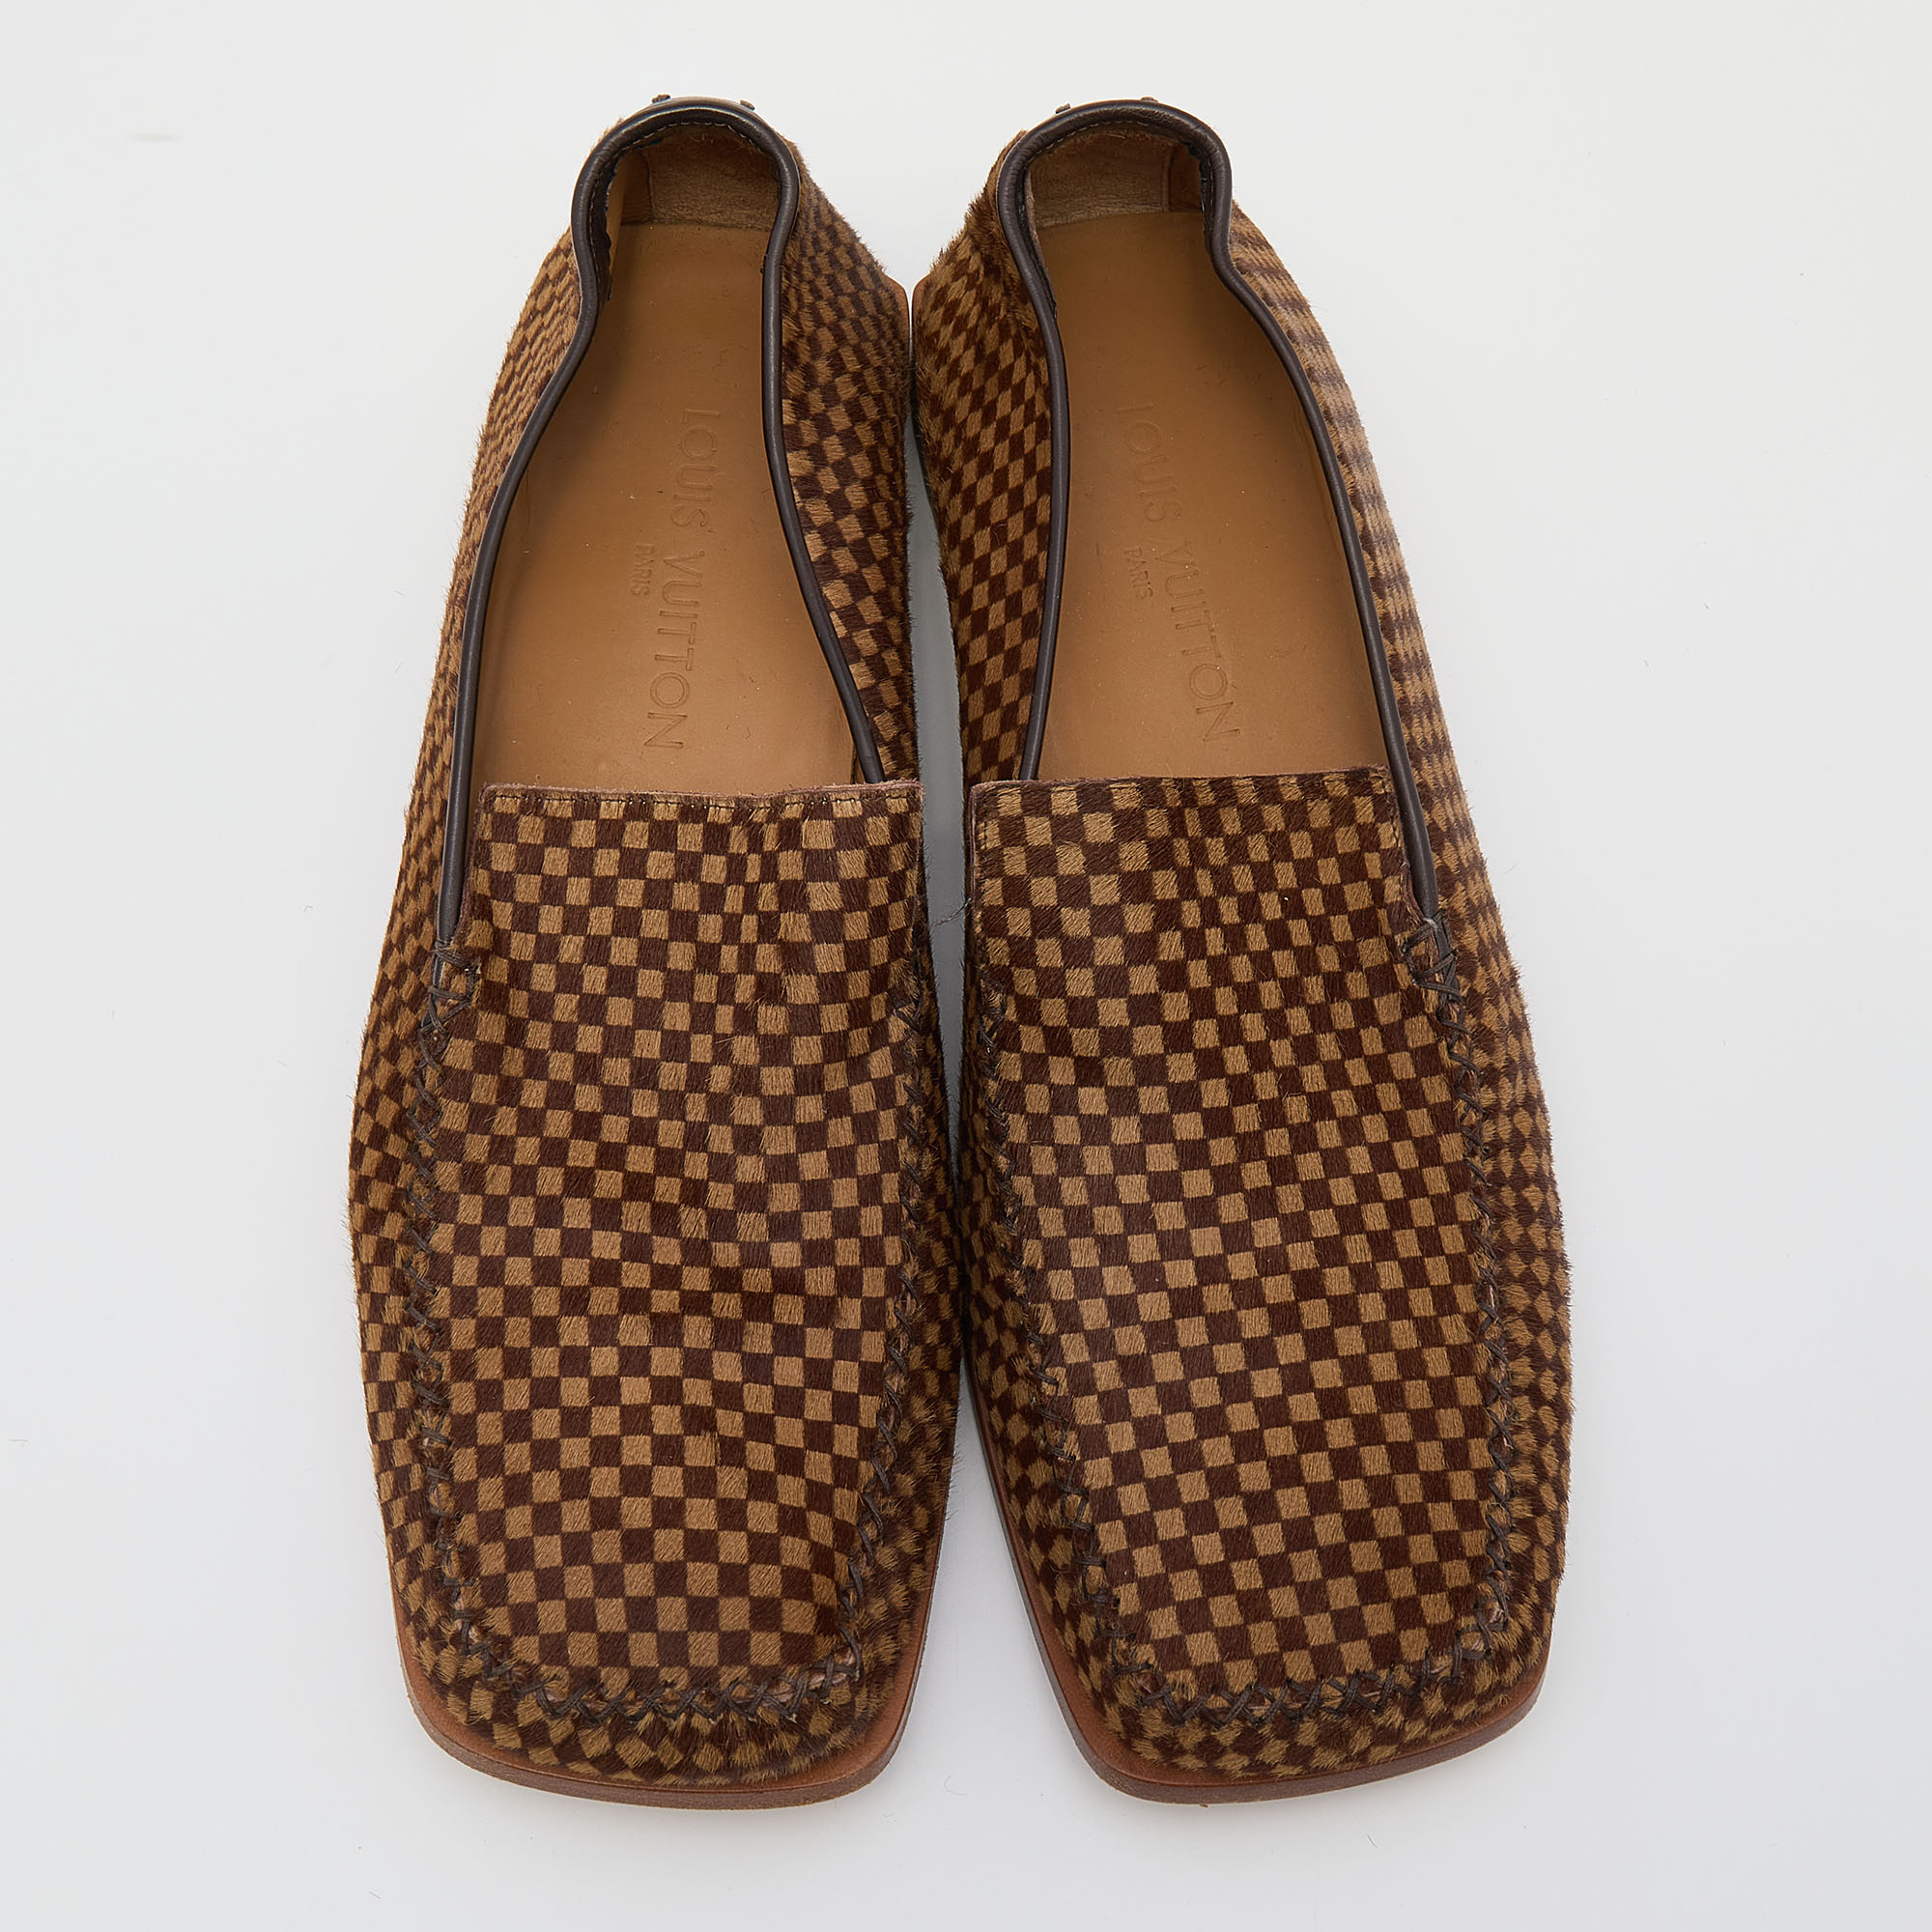 Louis Vuitton Beige/Brown Damier Pony Hair Montaigne Square Toe Loafers Size 44